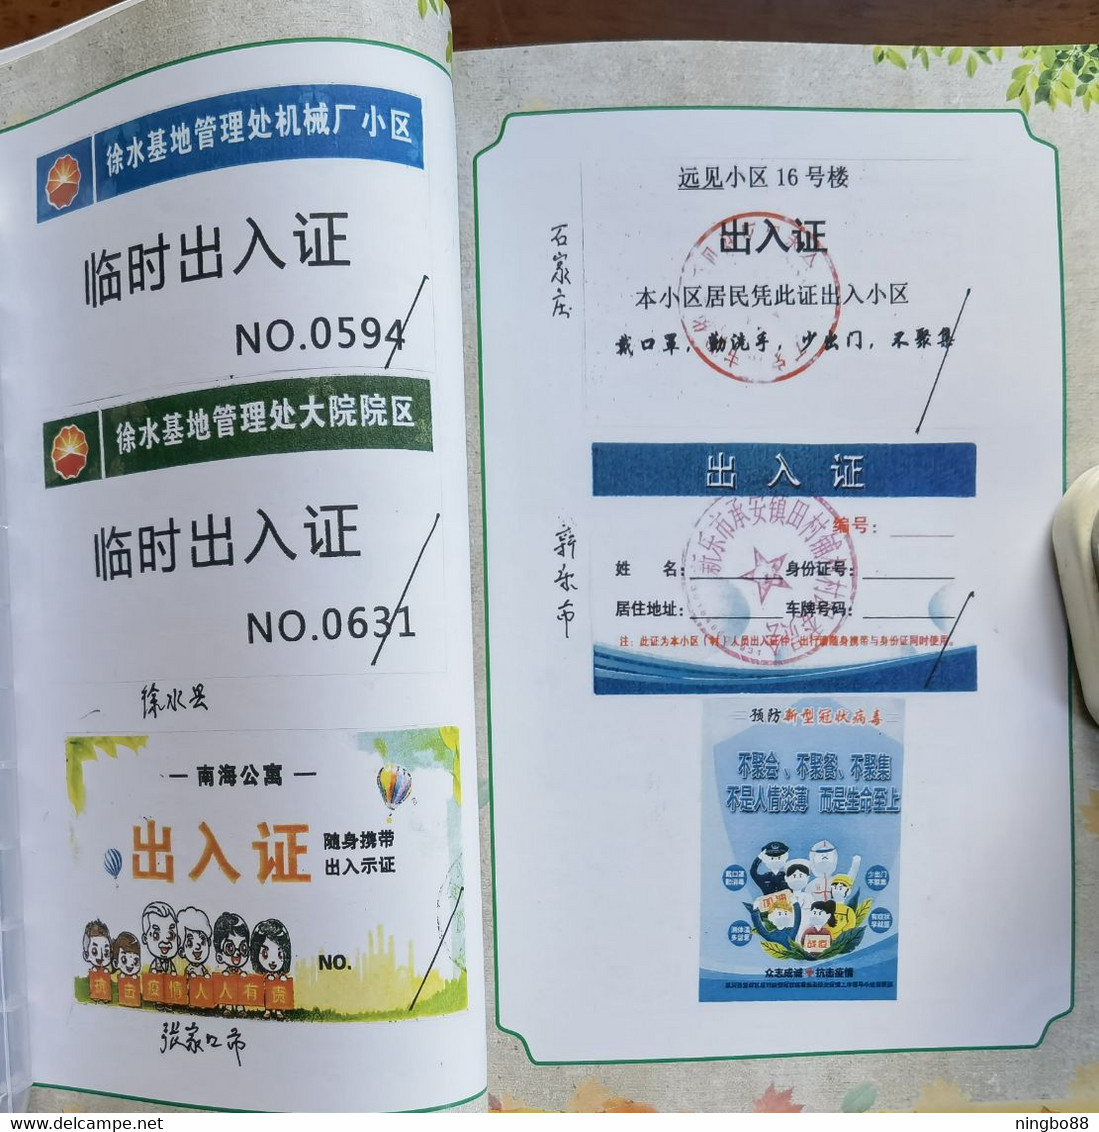 China 2021 fighting COVID-19 pandemic Folk collection Resident pass note special catalogue book about 200 Pages